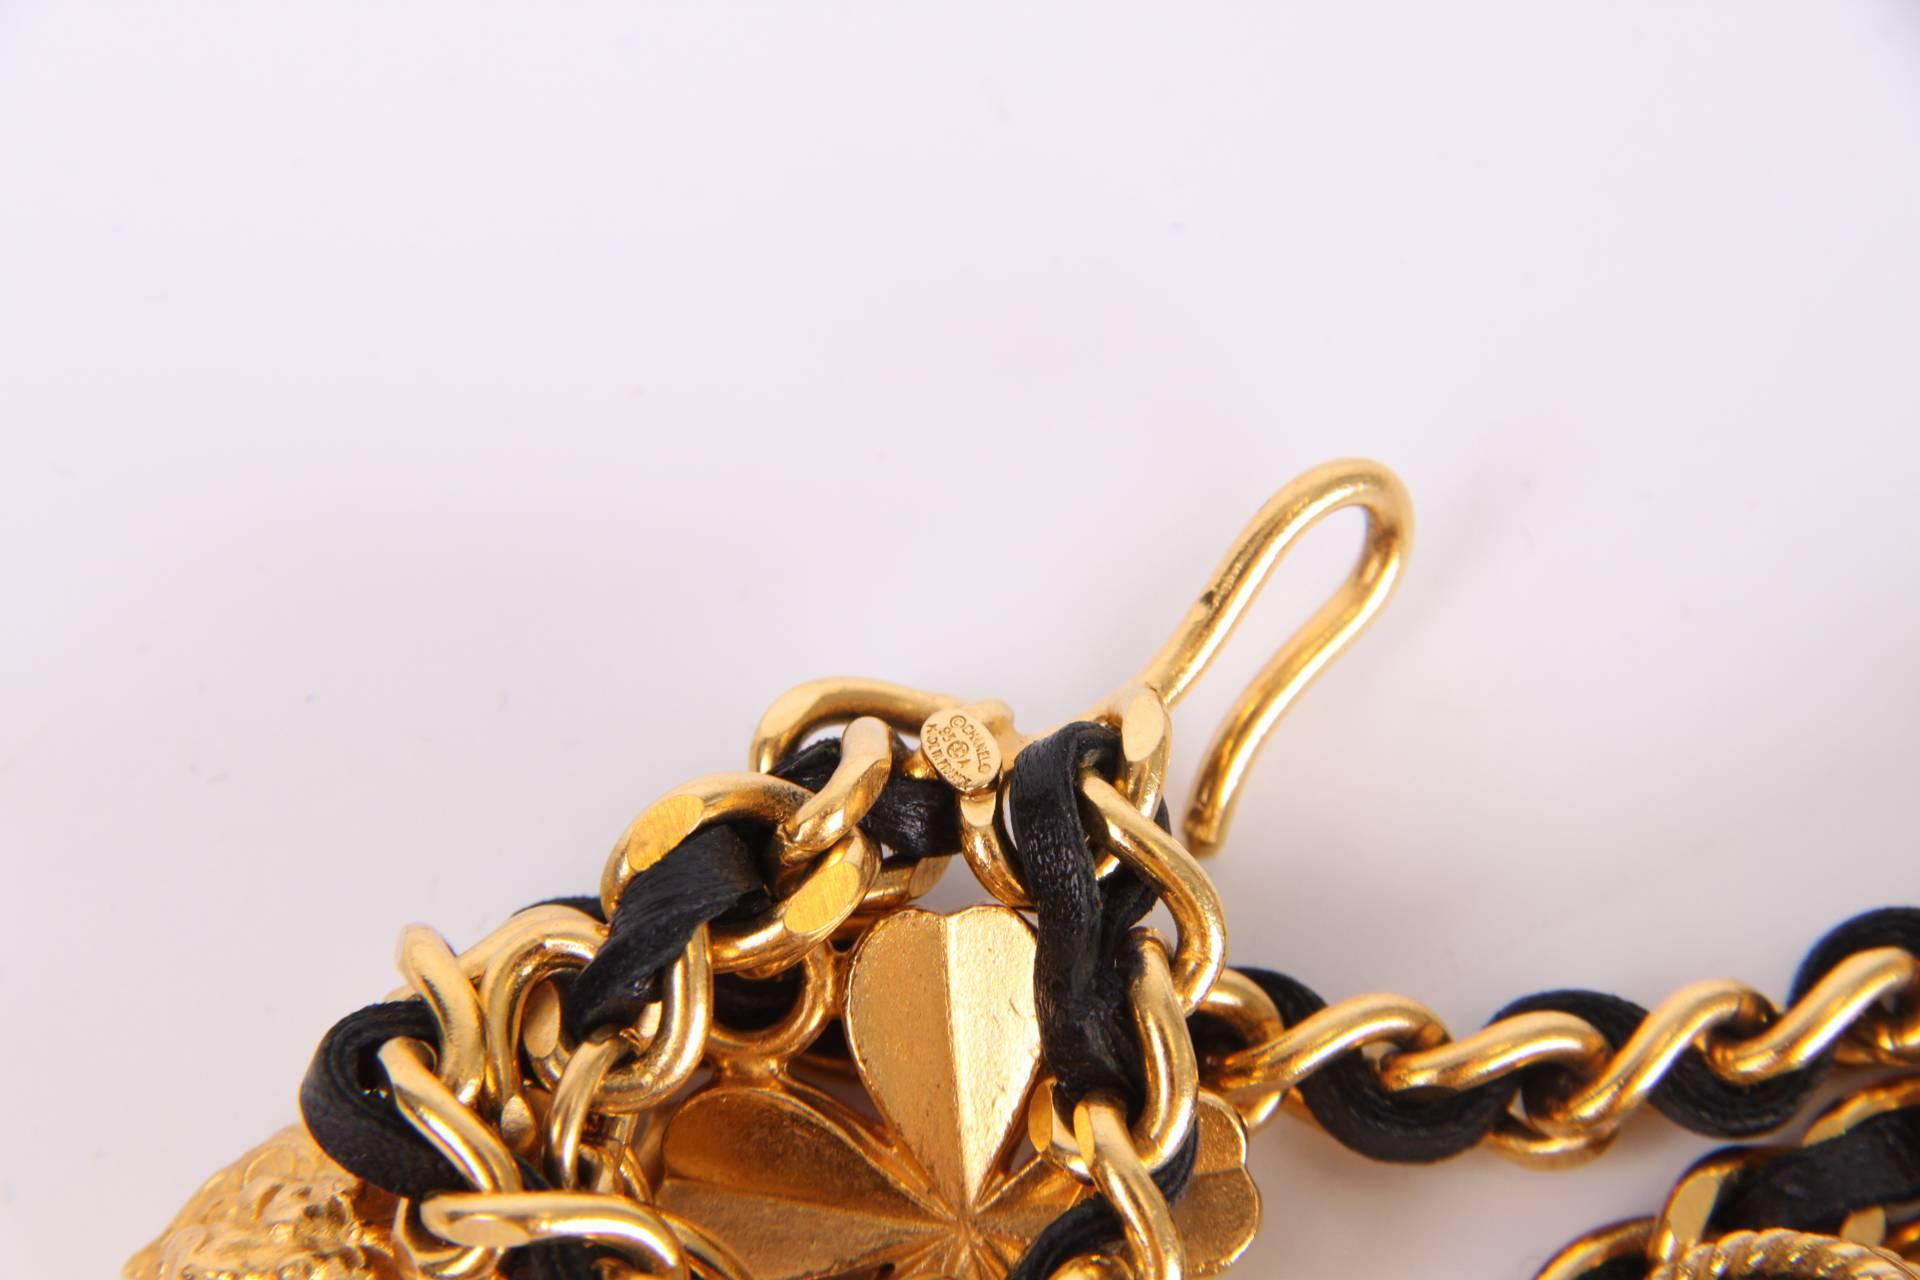 Vintage Chanel chain which can be worn as a belt, but also as a necklace.

This gold-tone chain measures 95 centimeters and holds as much as 21 charms which represent the iconic fashion brand: a four-leaf clover, Leo the Lion, lucky star, 5, Coco